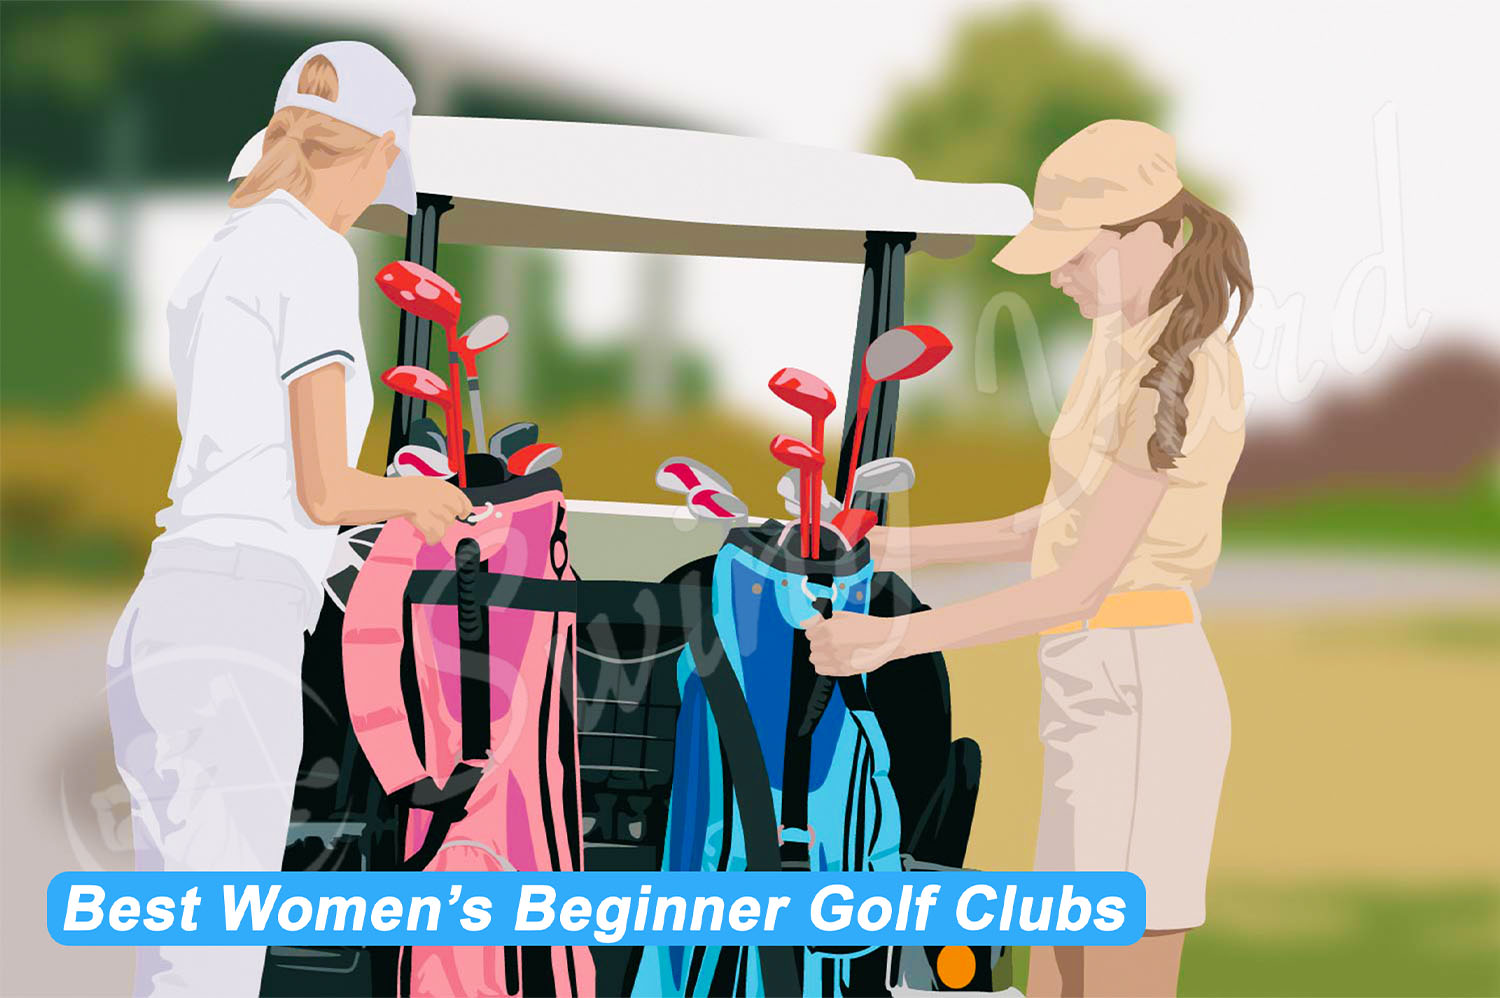 Two ladies with women's beginner golf clubs